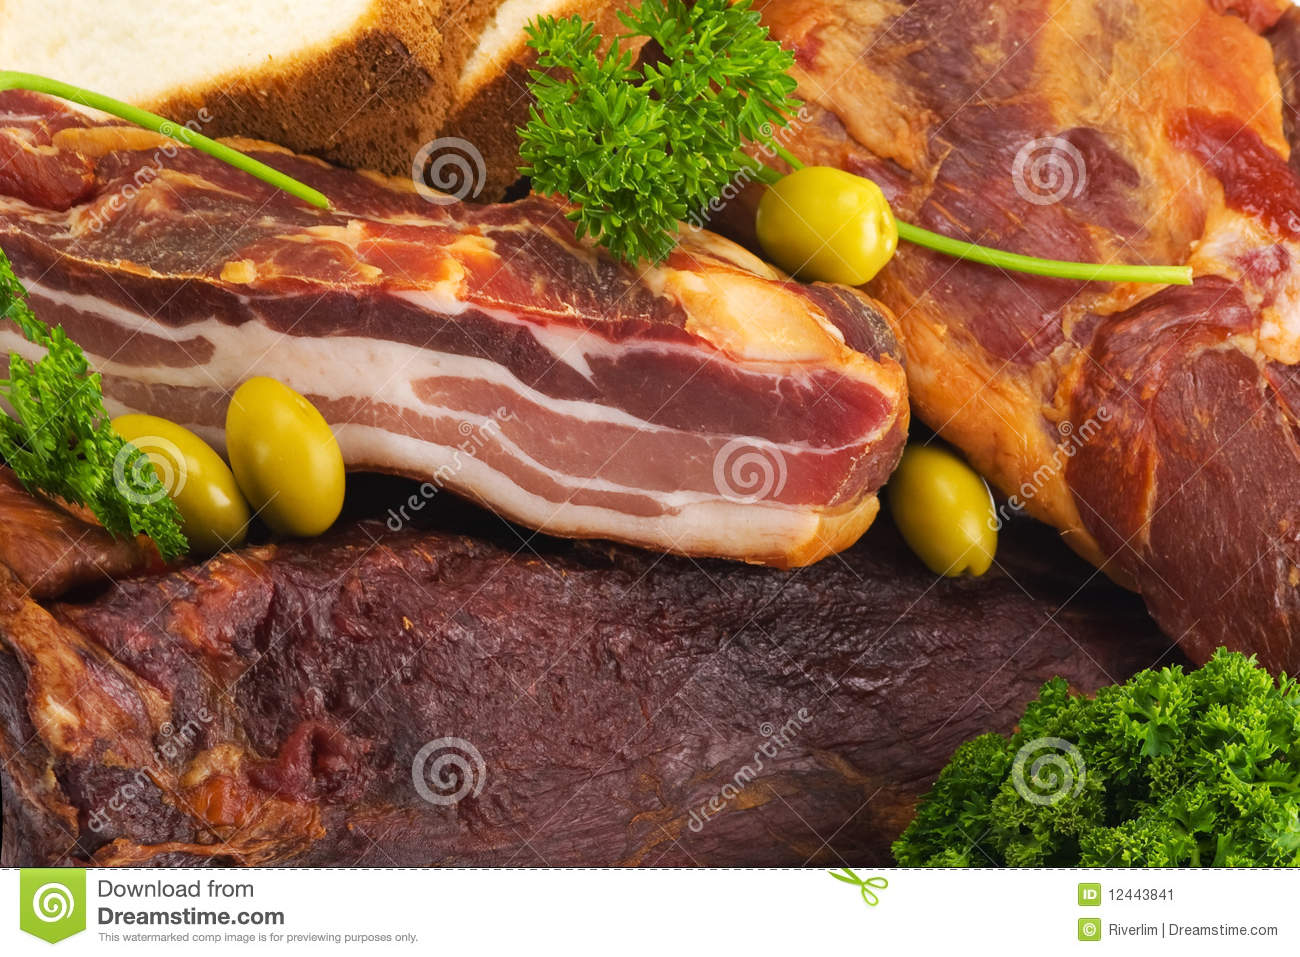 Dried Meat Stock Image   Image  12443841